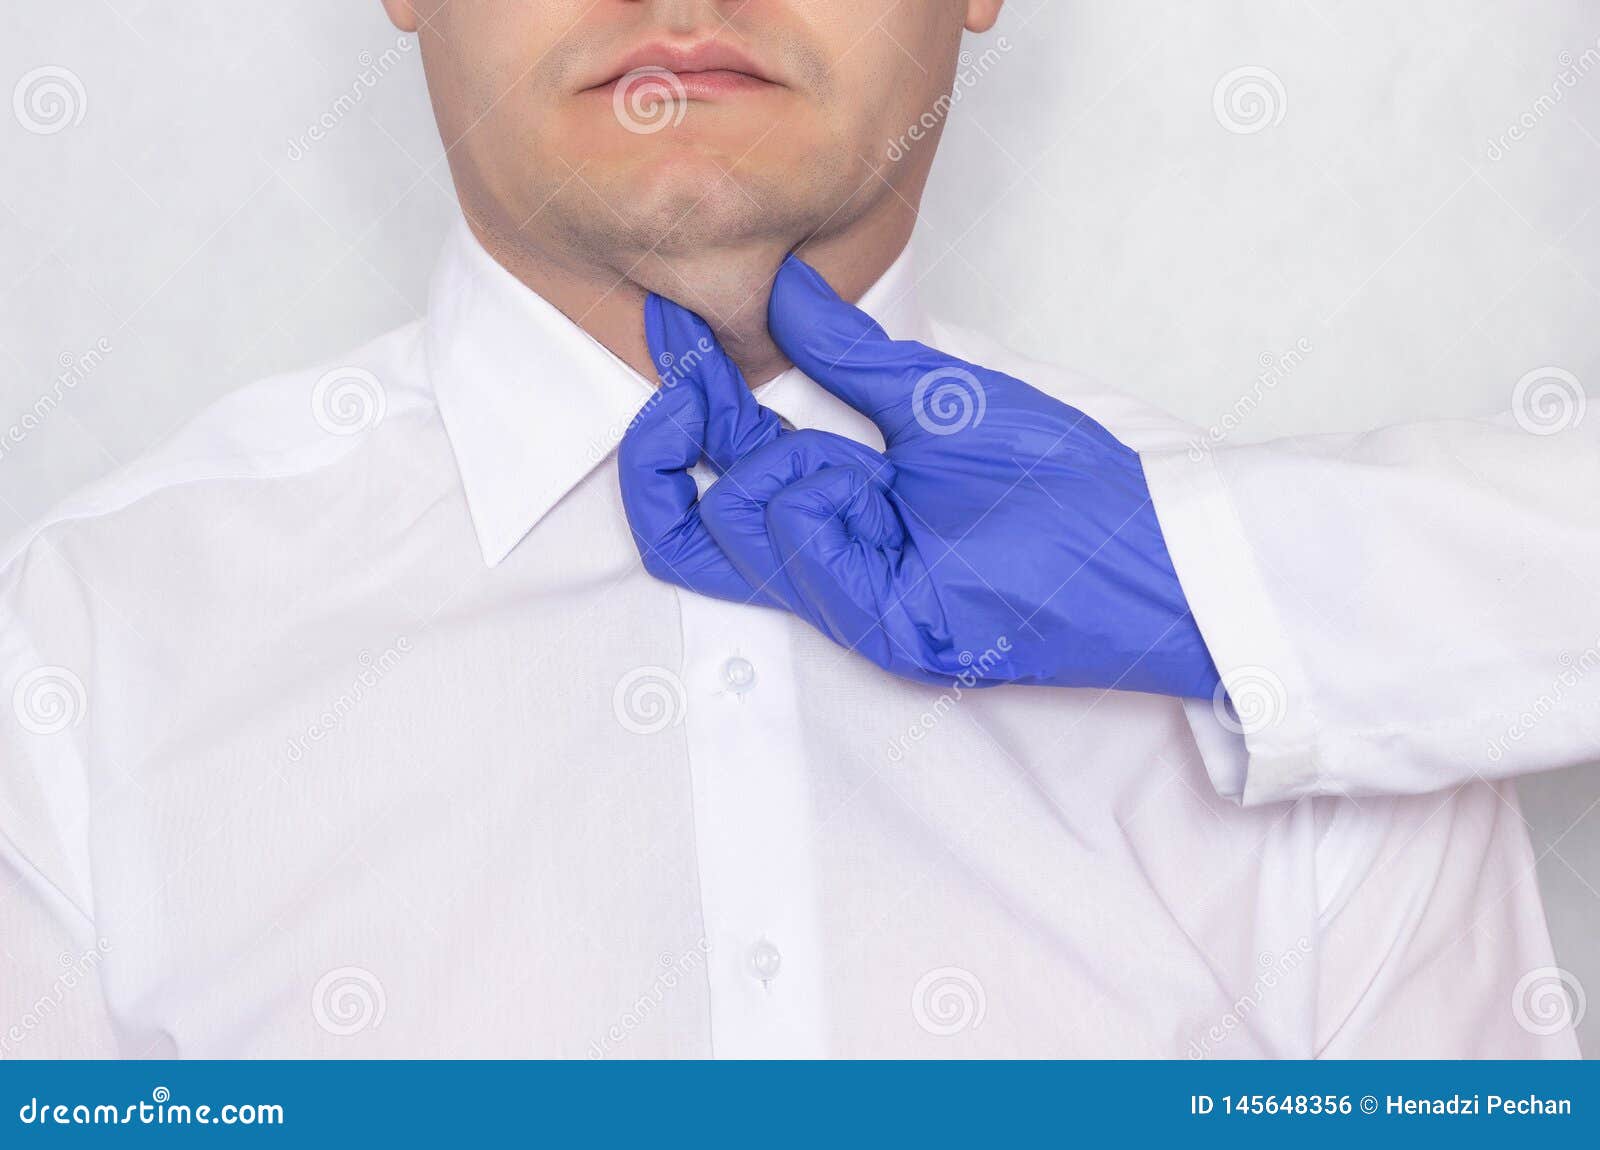 plastic surgeon doctor prepares a young caucasian man for a double chin fat surgery, thyroid gland, portrait